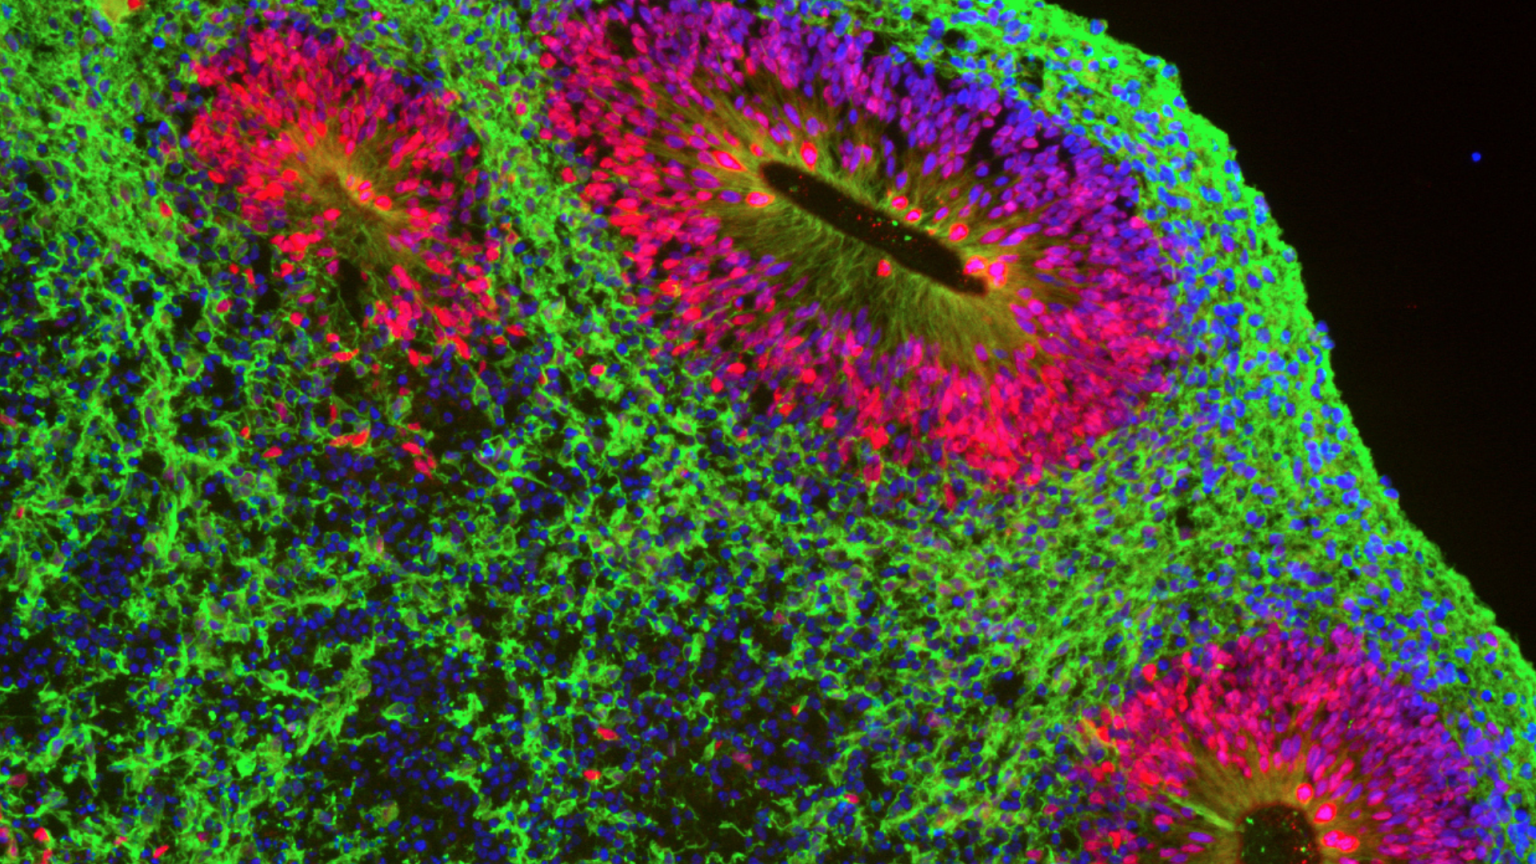 Shown here is the internal, self-organised structure of a stem cell derived, human cerebral organoid. Rosettes of neural progenitor SOX2 positive radial glia (red) are interspersed with TUJ1 positive newborn neurons (green). Nuclei are marked in blue | © Christopher Playfoot & Didier Trono